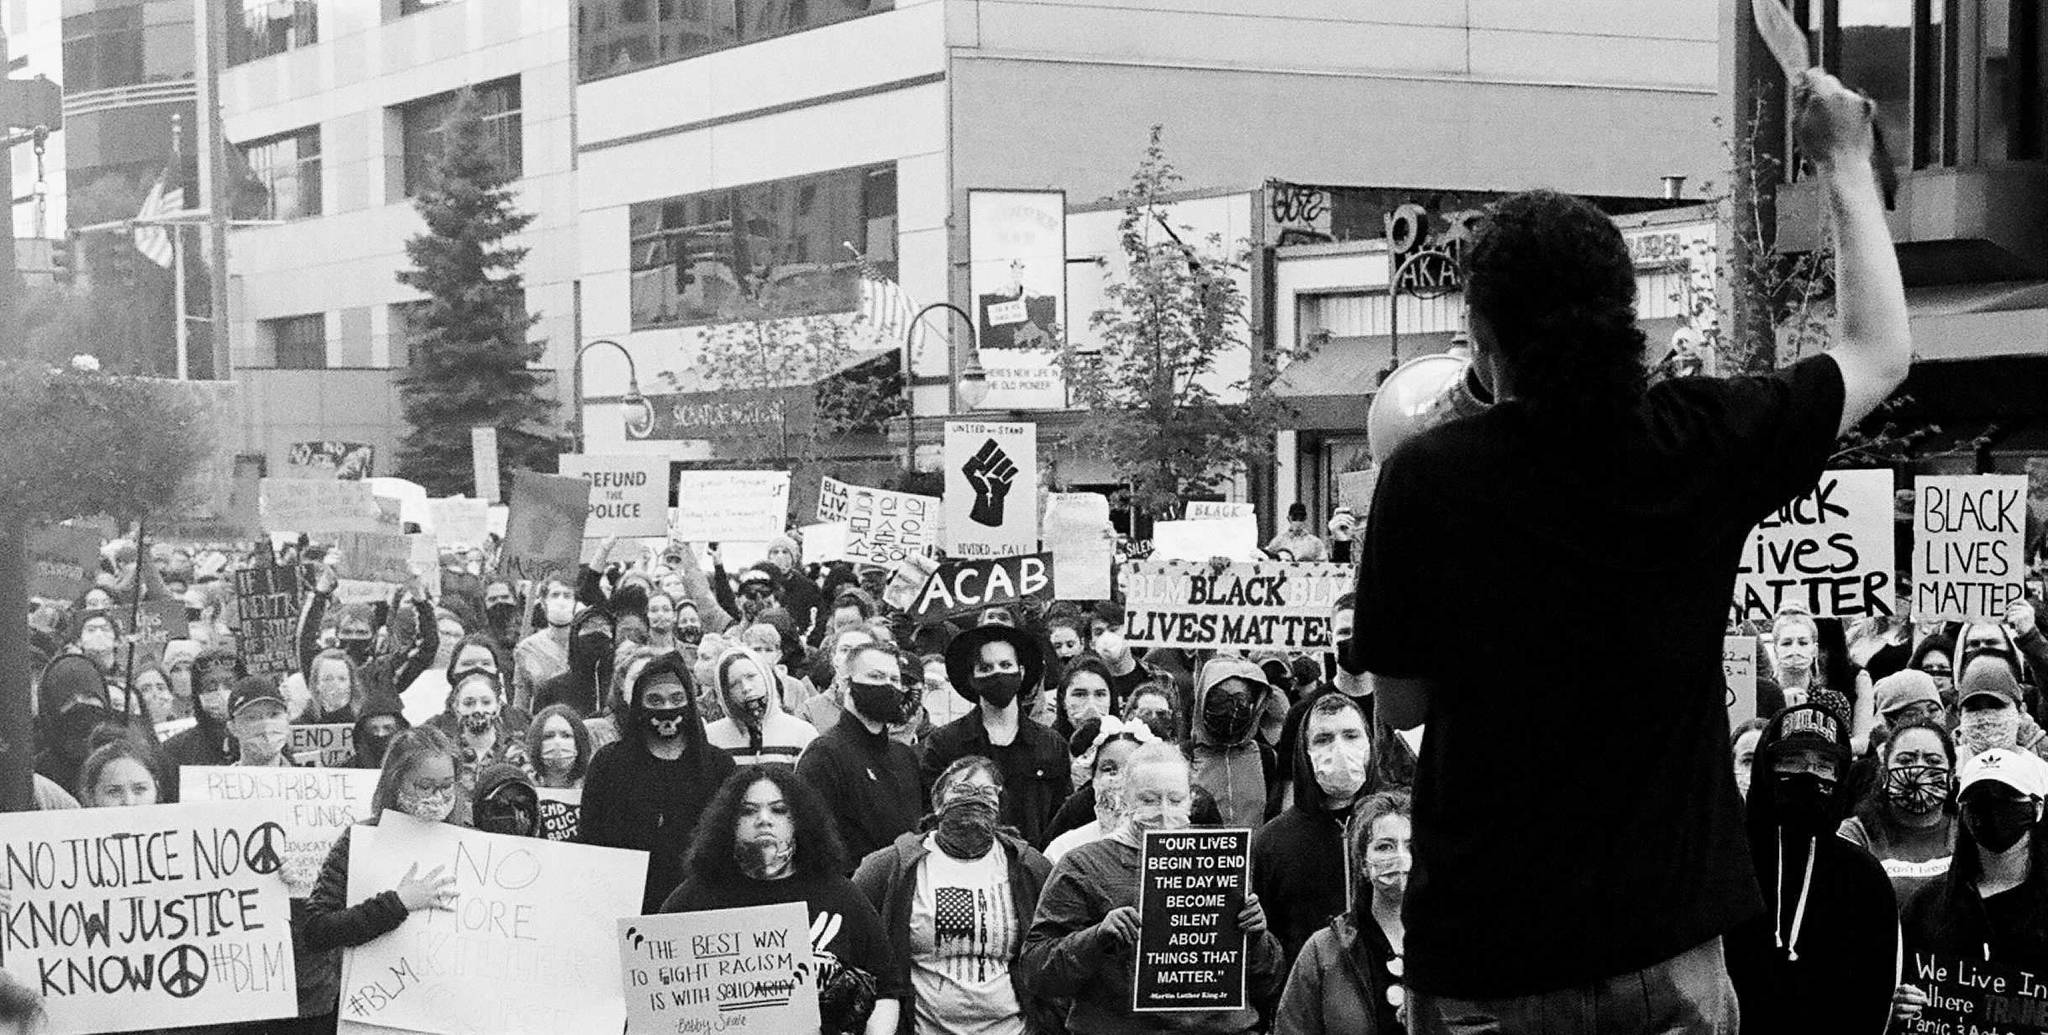 Photo by Thomas McIntyre
A group gathers in downtown Anchorage during a Black Lives Matter protest in the summer of 2020.